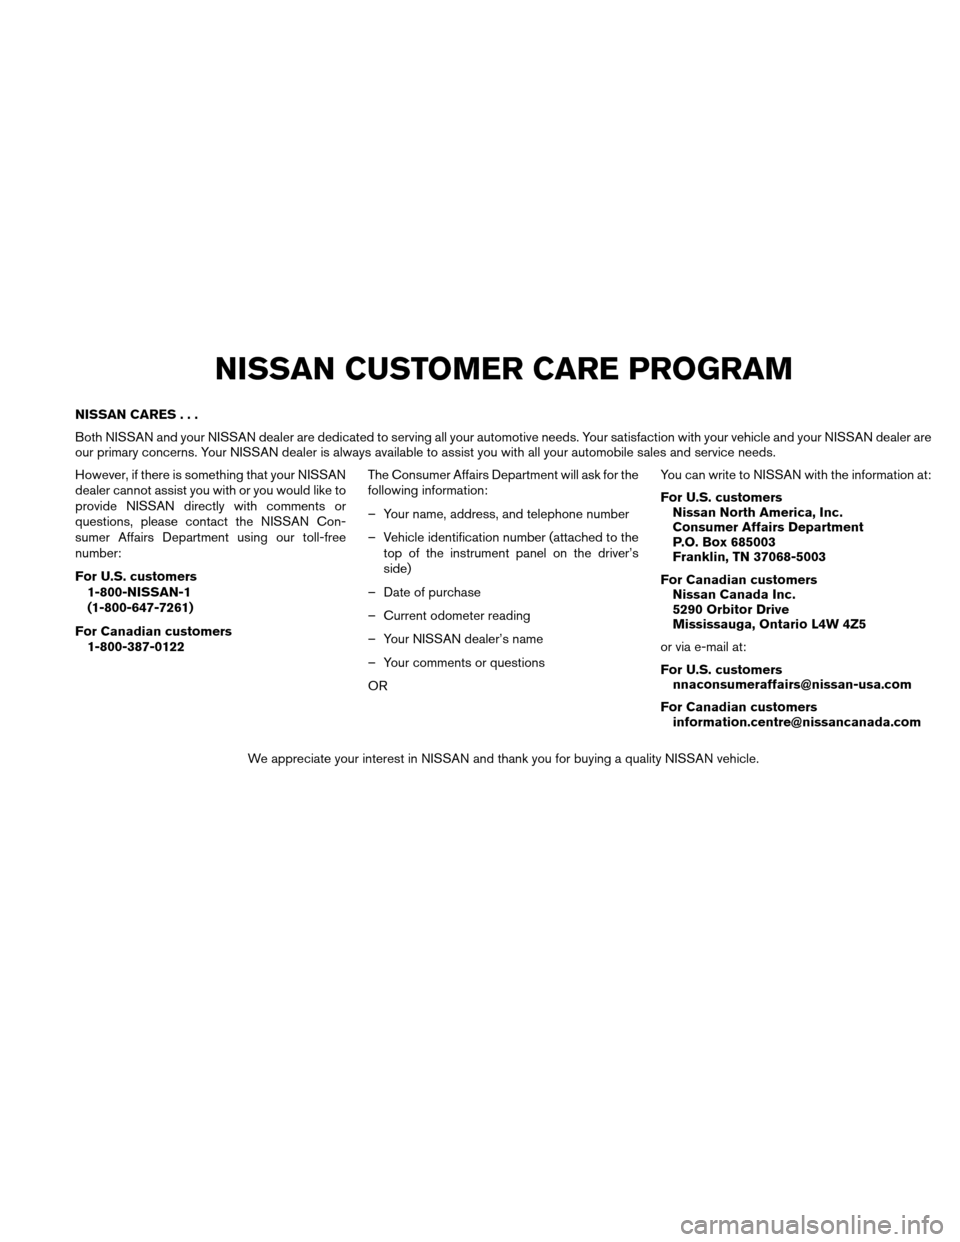 NISSAN ALTIMA HYBRID 2011 L32A / 4.G Owners Manual NISSAN CARES...
Both NISSAN and your NISSAN dealer are dedicated to serving all your automotive needs. Your satisfaction with your vehicle and your NISSAN dealer are
our primary concerns. Your NISSAN 